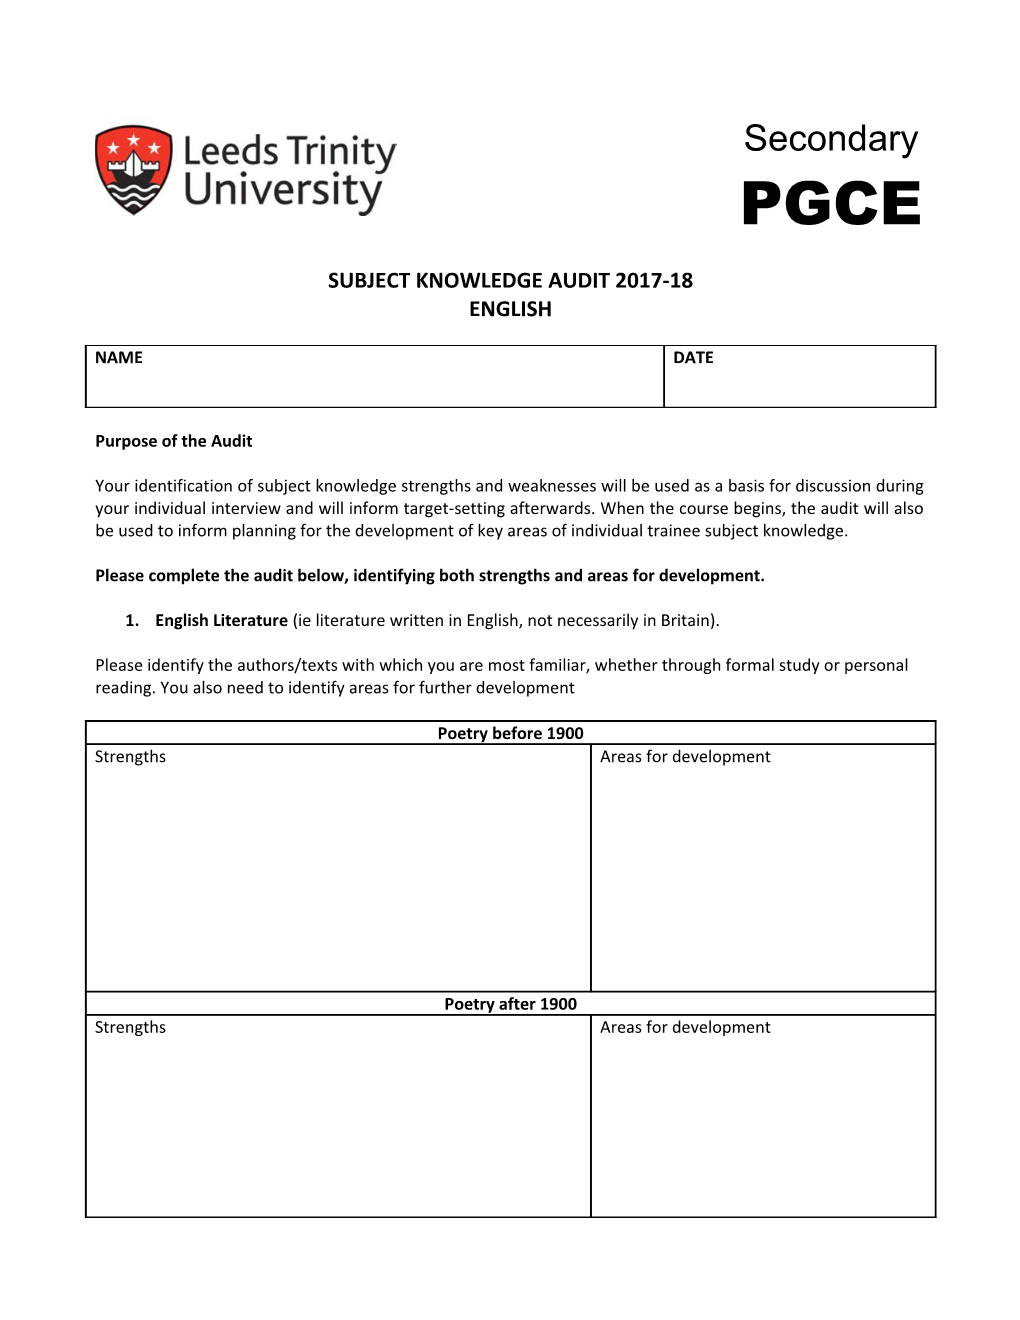 PGCE English Subject Knowledge Audit 2017-18